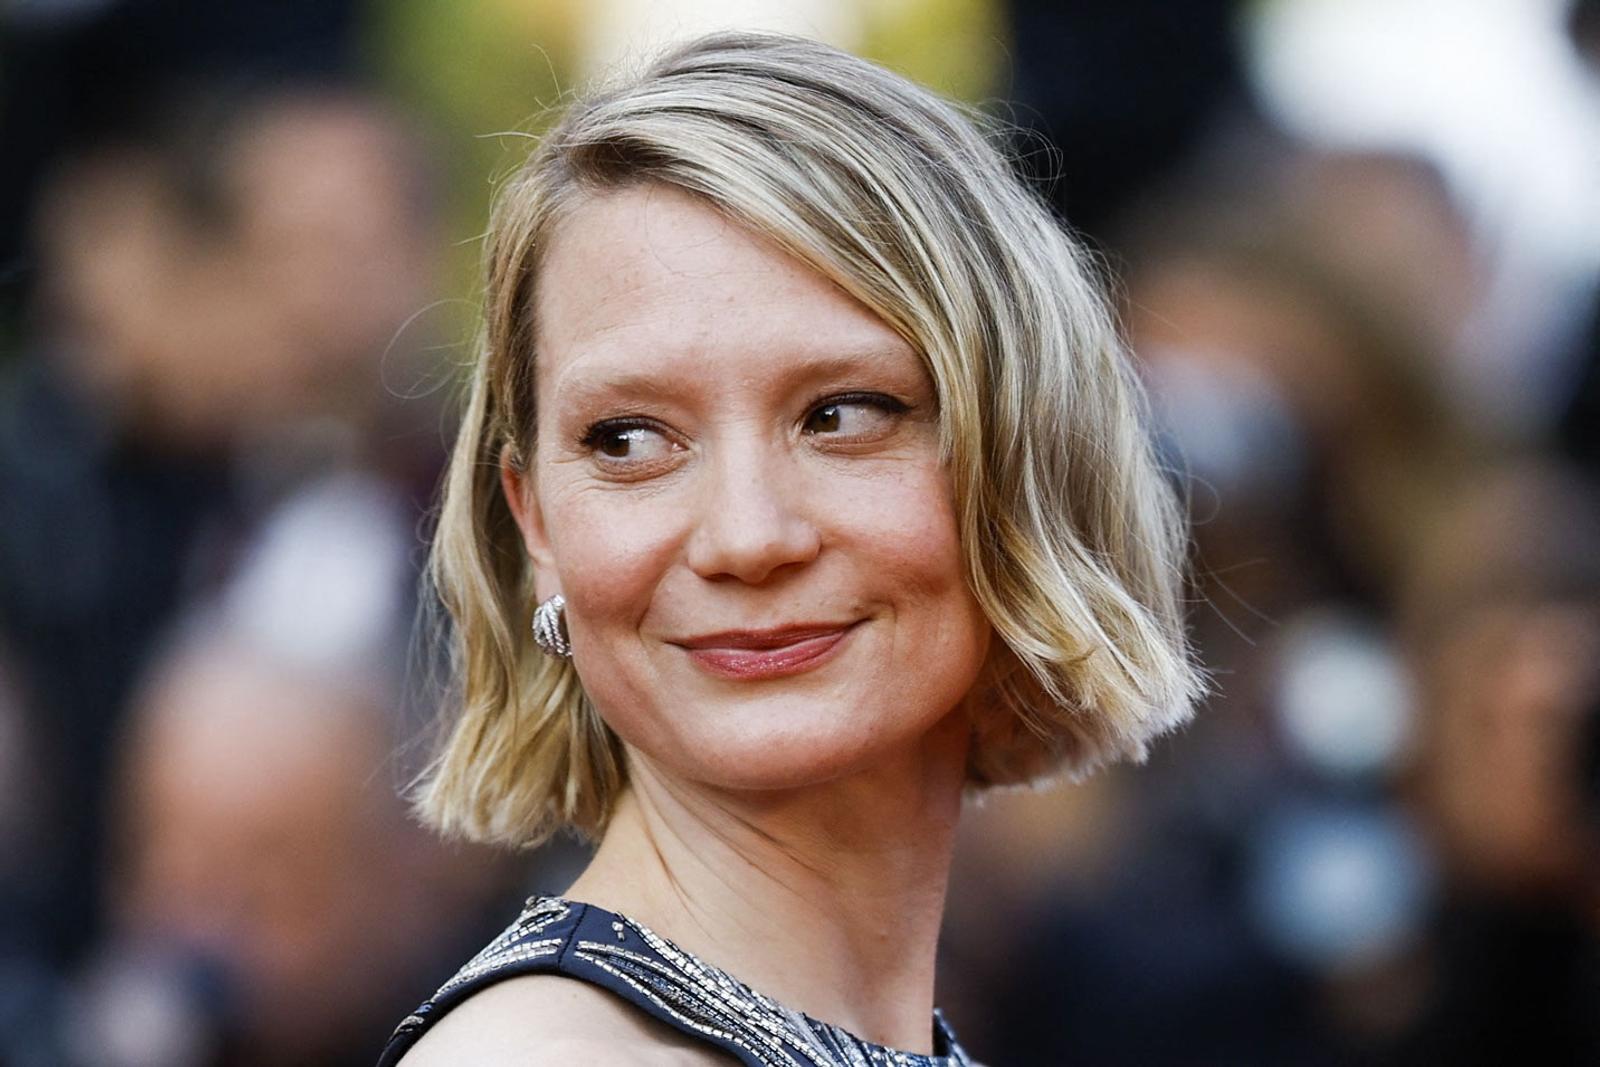 The 76th Cannes Film Festival - Screening of the film "Club Zero" in competition - Red Carpet Arrivals - Cannes, France, May 22,  2023. Cast member Mia Wasikowska poses. REUTERS/Gonzalo Fuentes Photo: GONZALO FUENTES/REUTERS